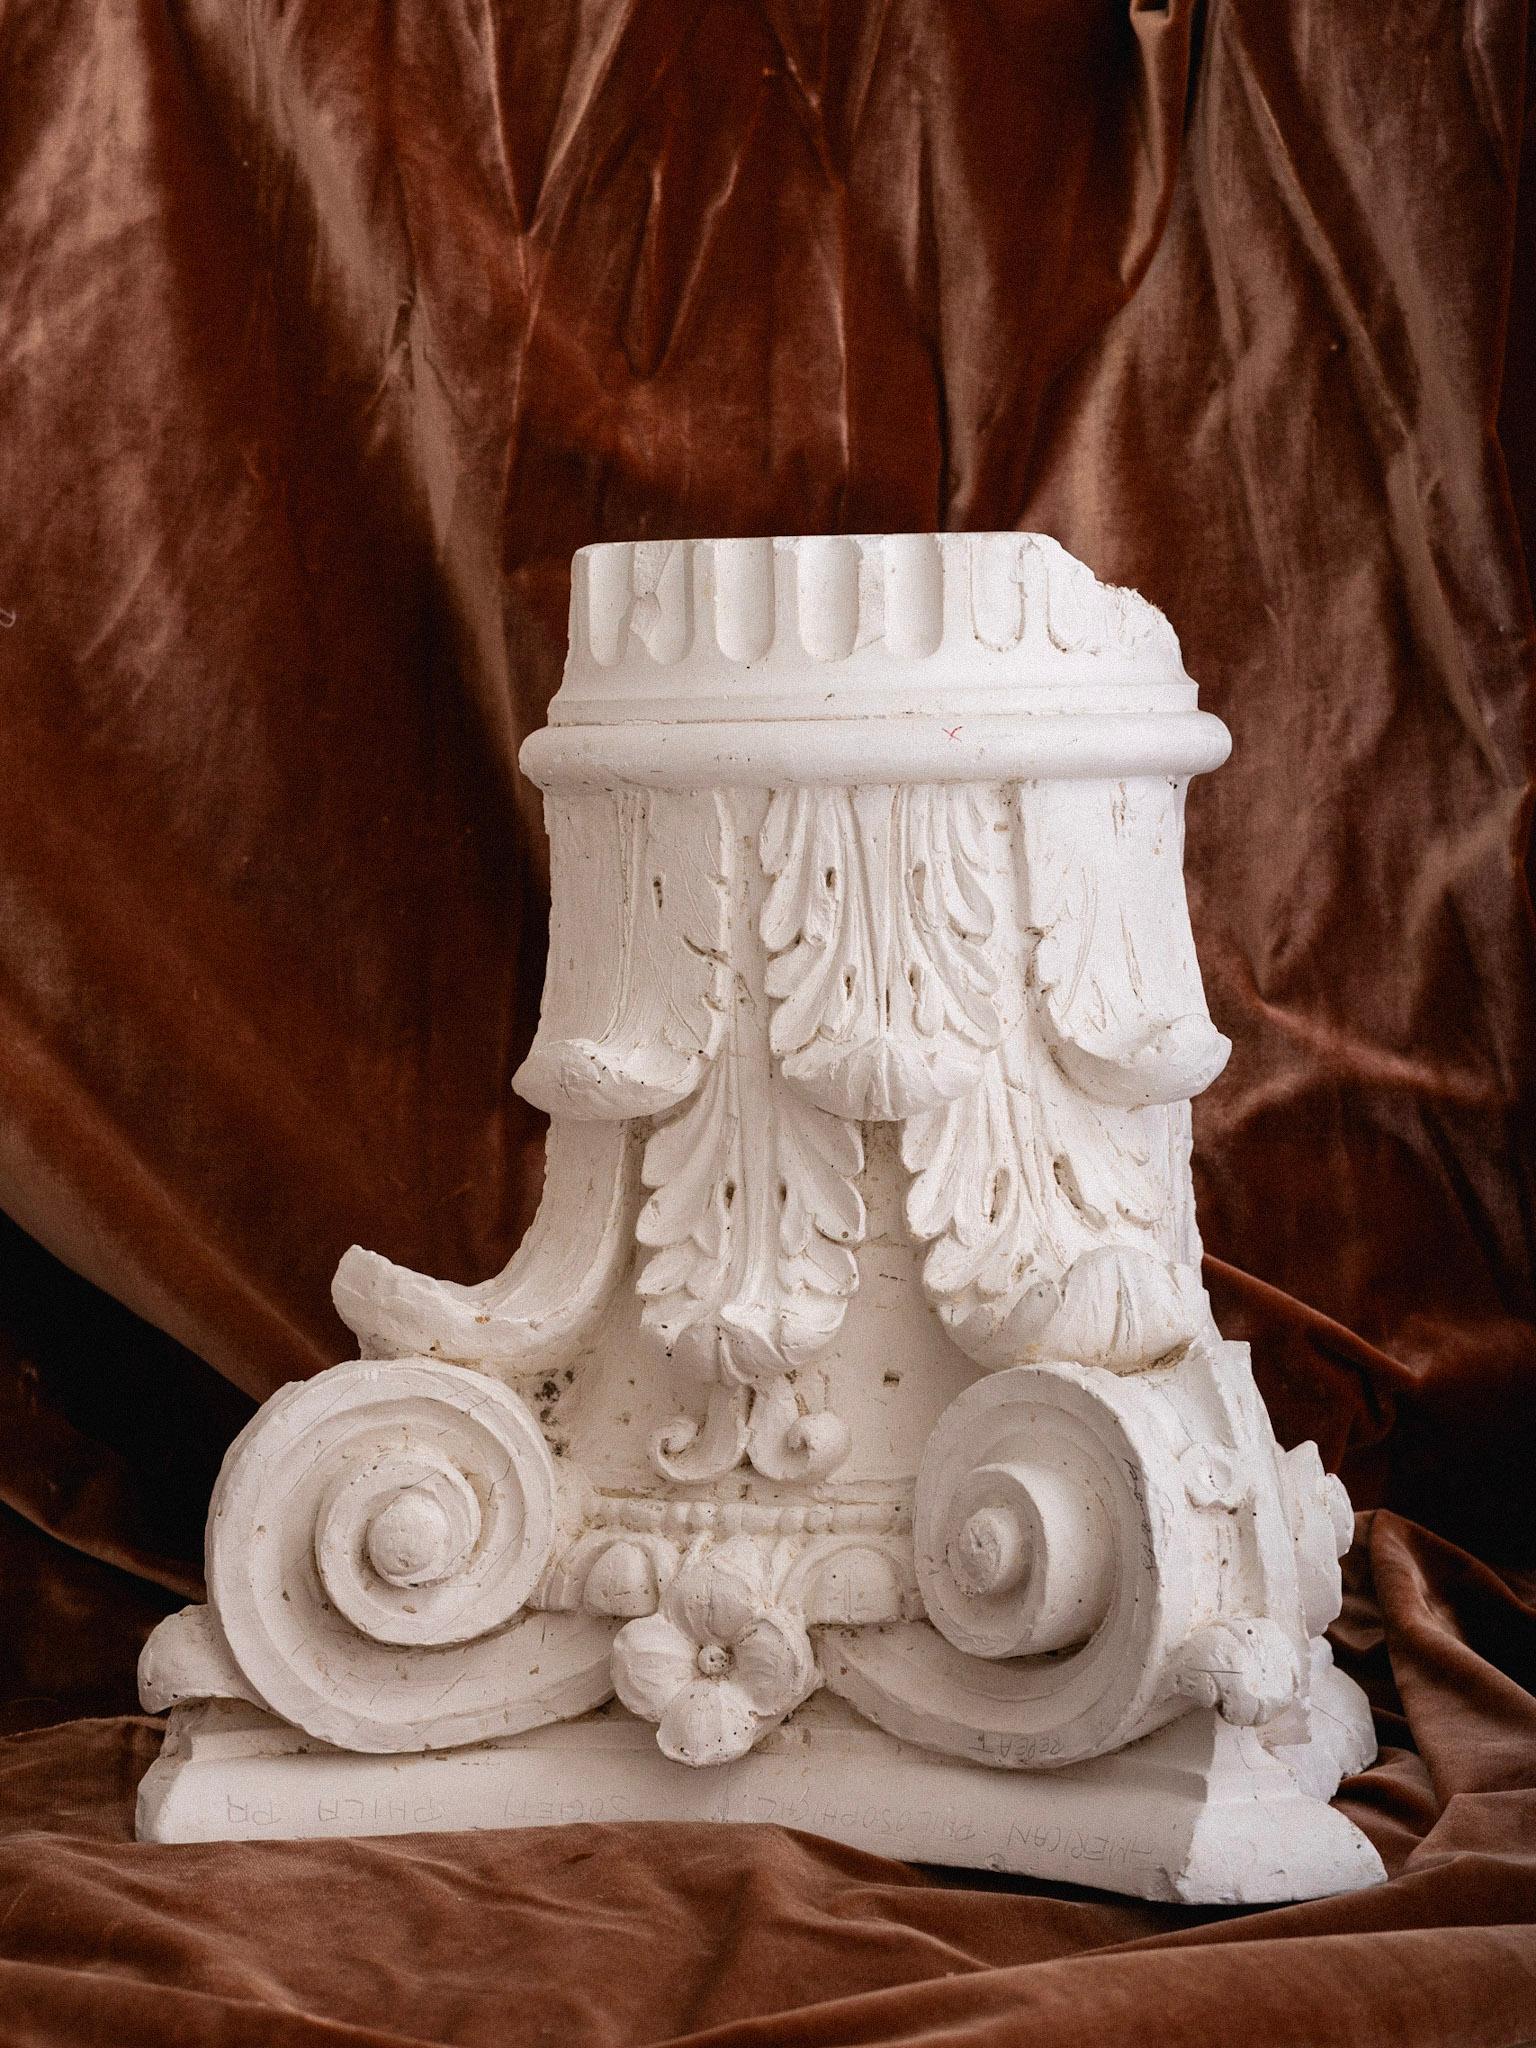 A plaster study of a corinthian column. Marked in pencil “American Philosophical Society, Philadelphia, PA.” Rough unsealed plaster patina.